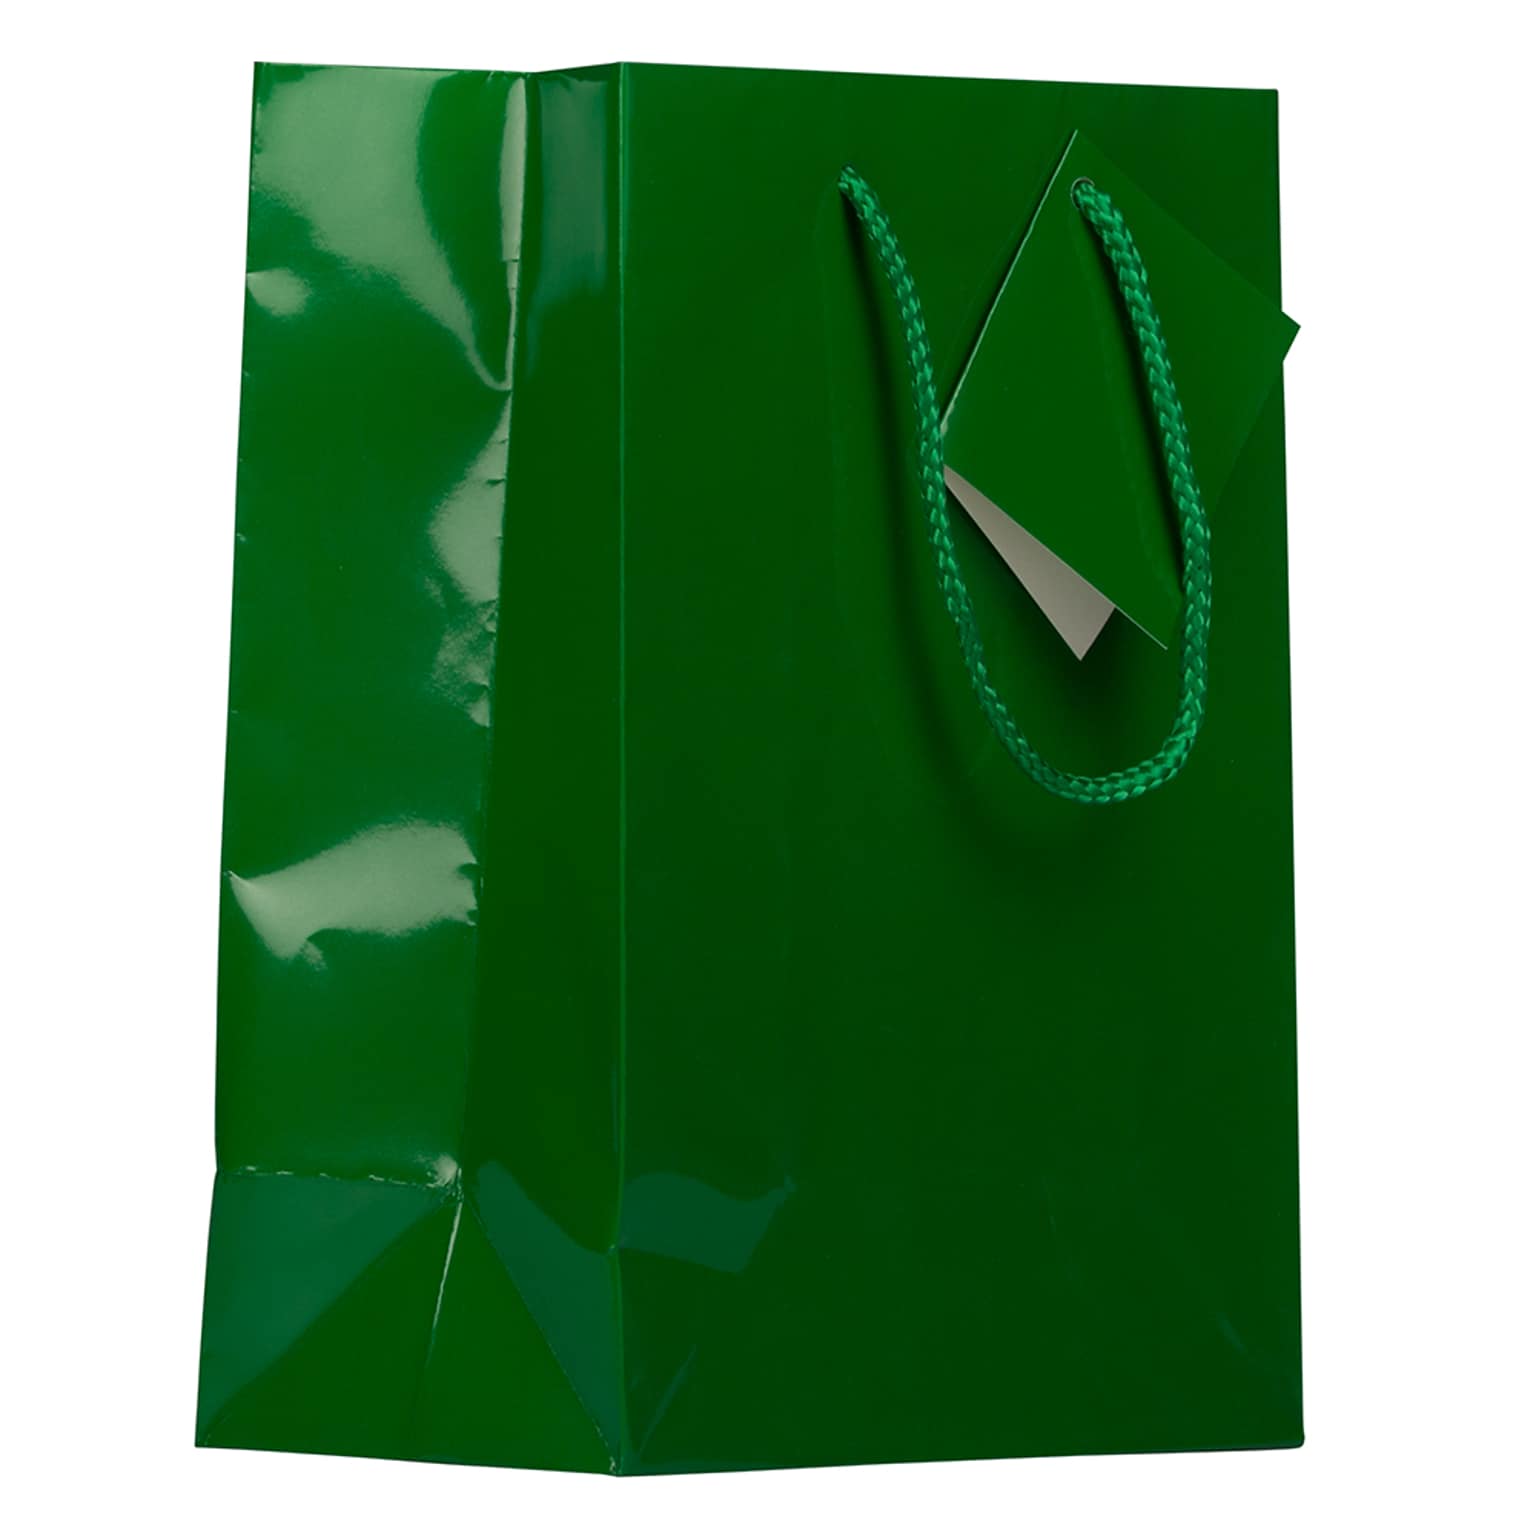 JAM PAPER Glossy Gift Bags with Rope Handles, Medium, 8 x 10, Green, 3 Bags/Pack (672GLGRB)